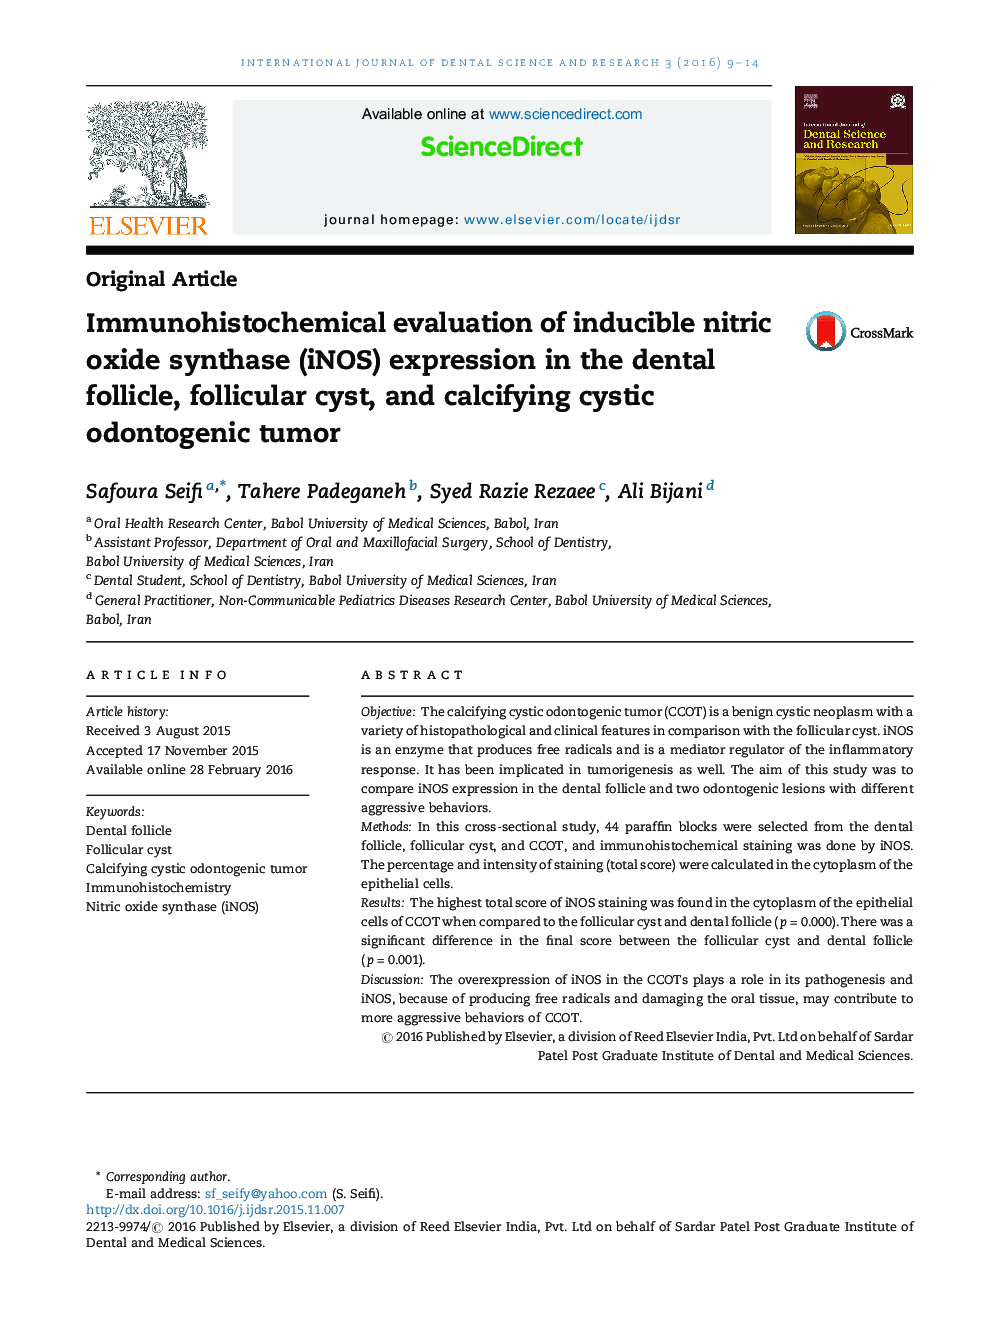 Immunohistochemical evaluation of inducible nitric oxide synthase (iNOS) expression in the dental follicle, follicular cyst, and calcifying cystic odontogenic tumor